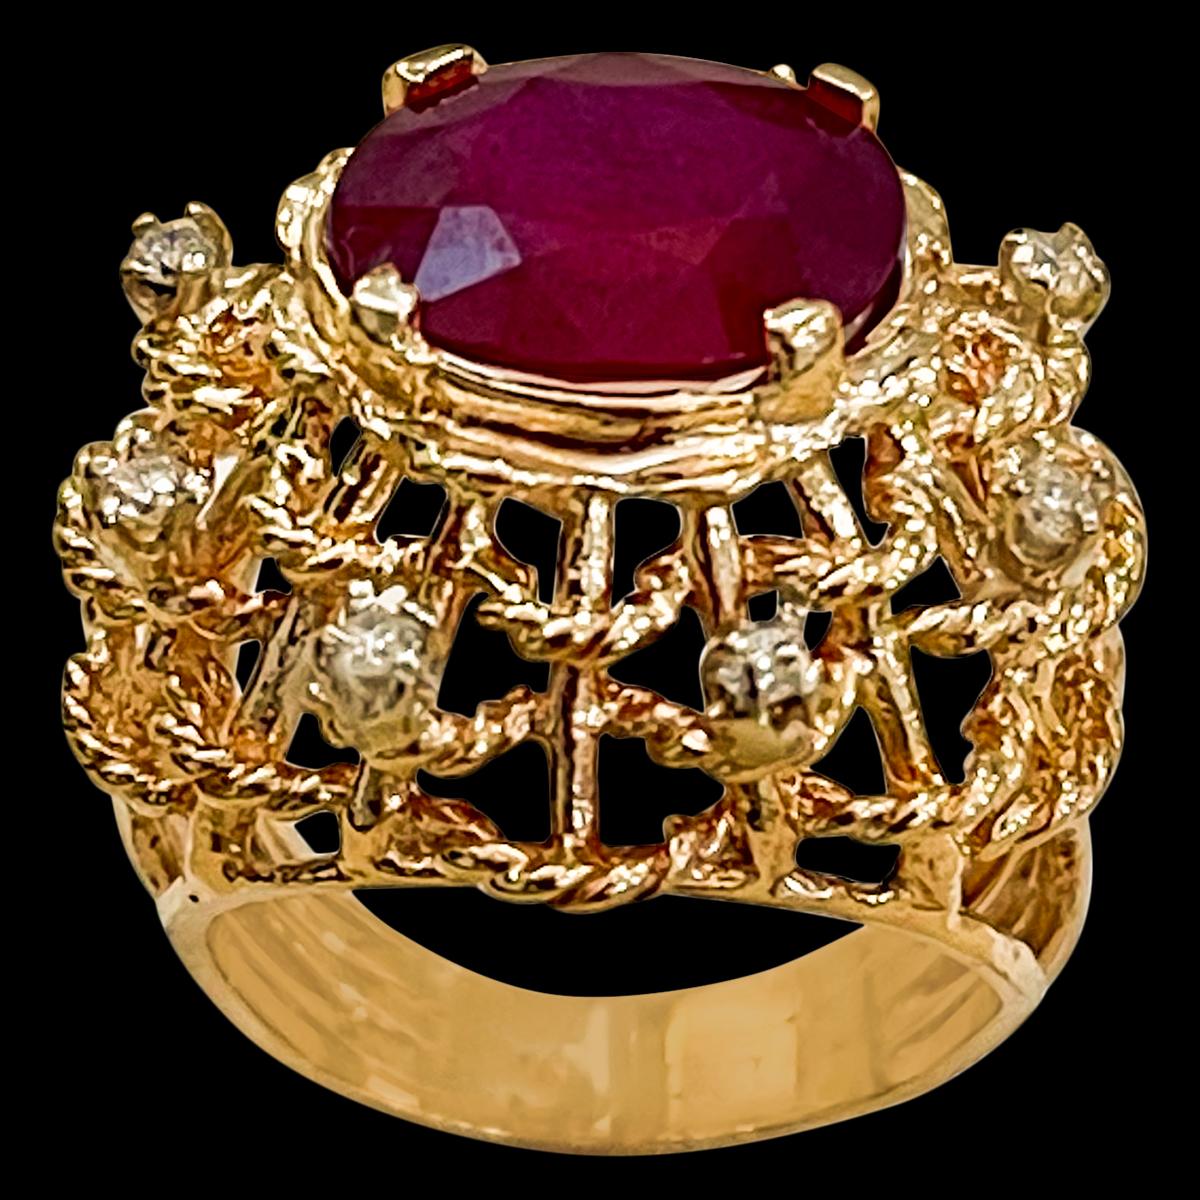 5 Carat Treated Ruby And Diamond 14 Karat Yellow Gold Ring Size 6
 prong set
14 K Yellow Gold: 8.9  gram
Stamped 14K
Ring Size 5 ( can be altered for no charge )
Large 4 carat oval shape ruby Treated surrounded by brilliant cut diamonds .
Diamonds: 